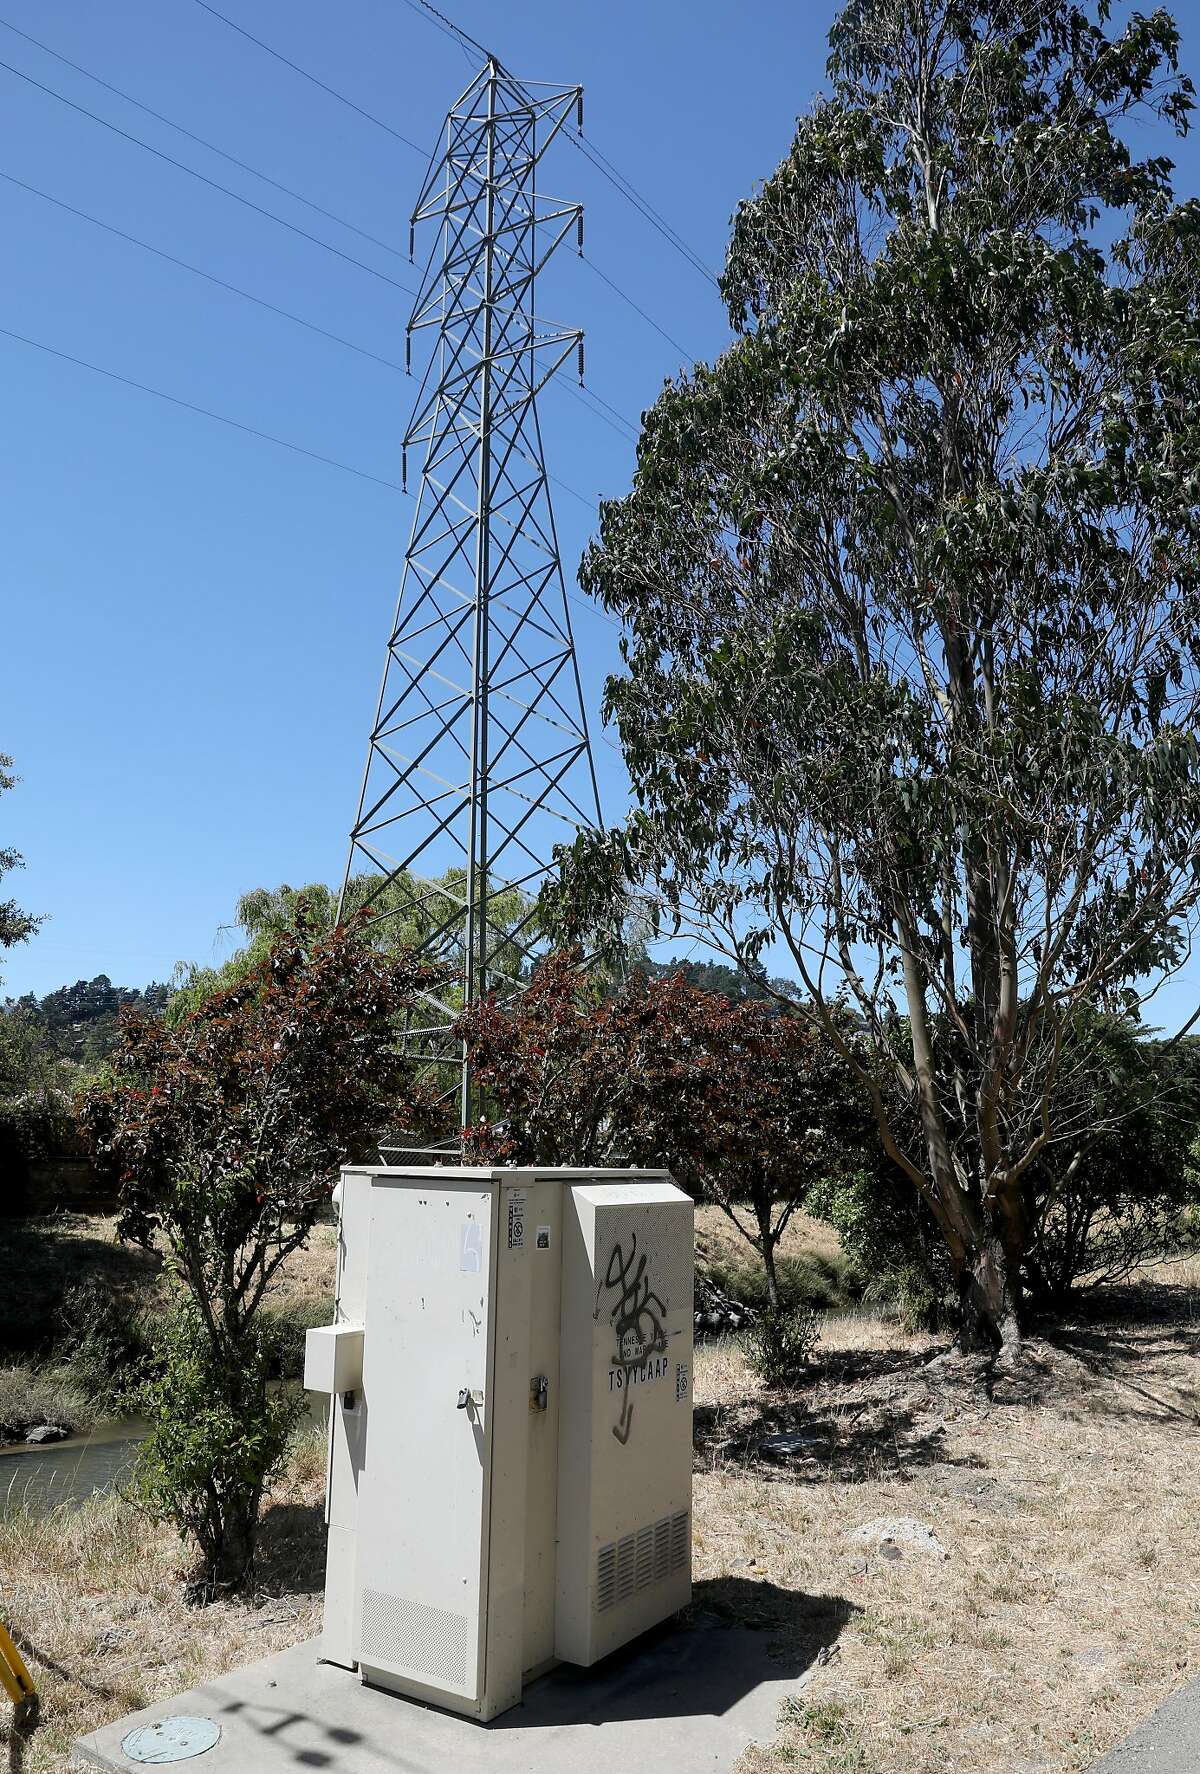 Marin power line seen behind a ATT underground power line at Tennessee Valley Rd. @ Marin Ave. next to the Charles F. McGlashan multiuse pathway on Monday, July 15, 2019 in Mill Valley, Calif.